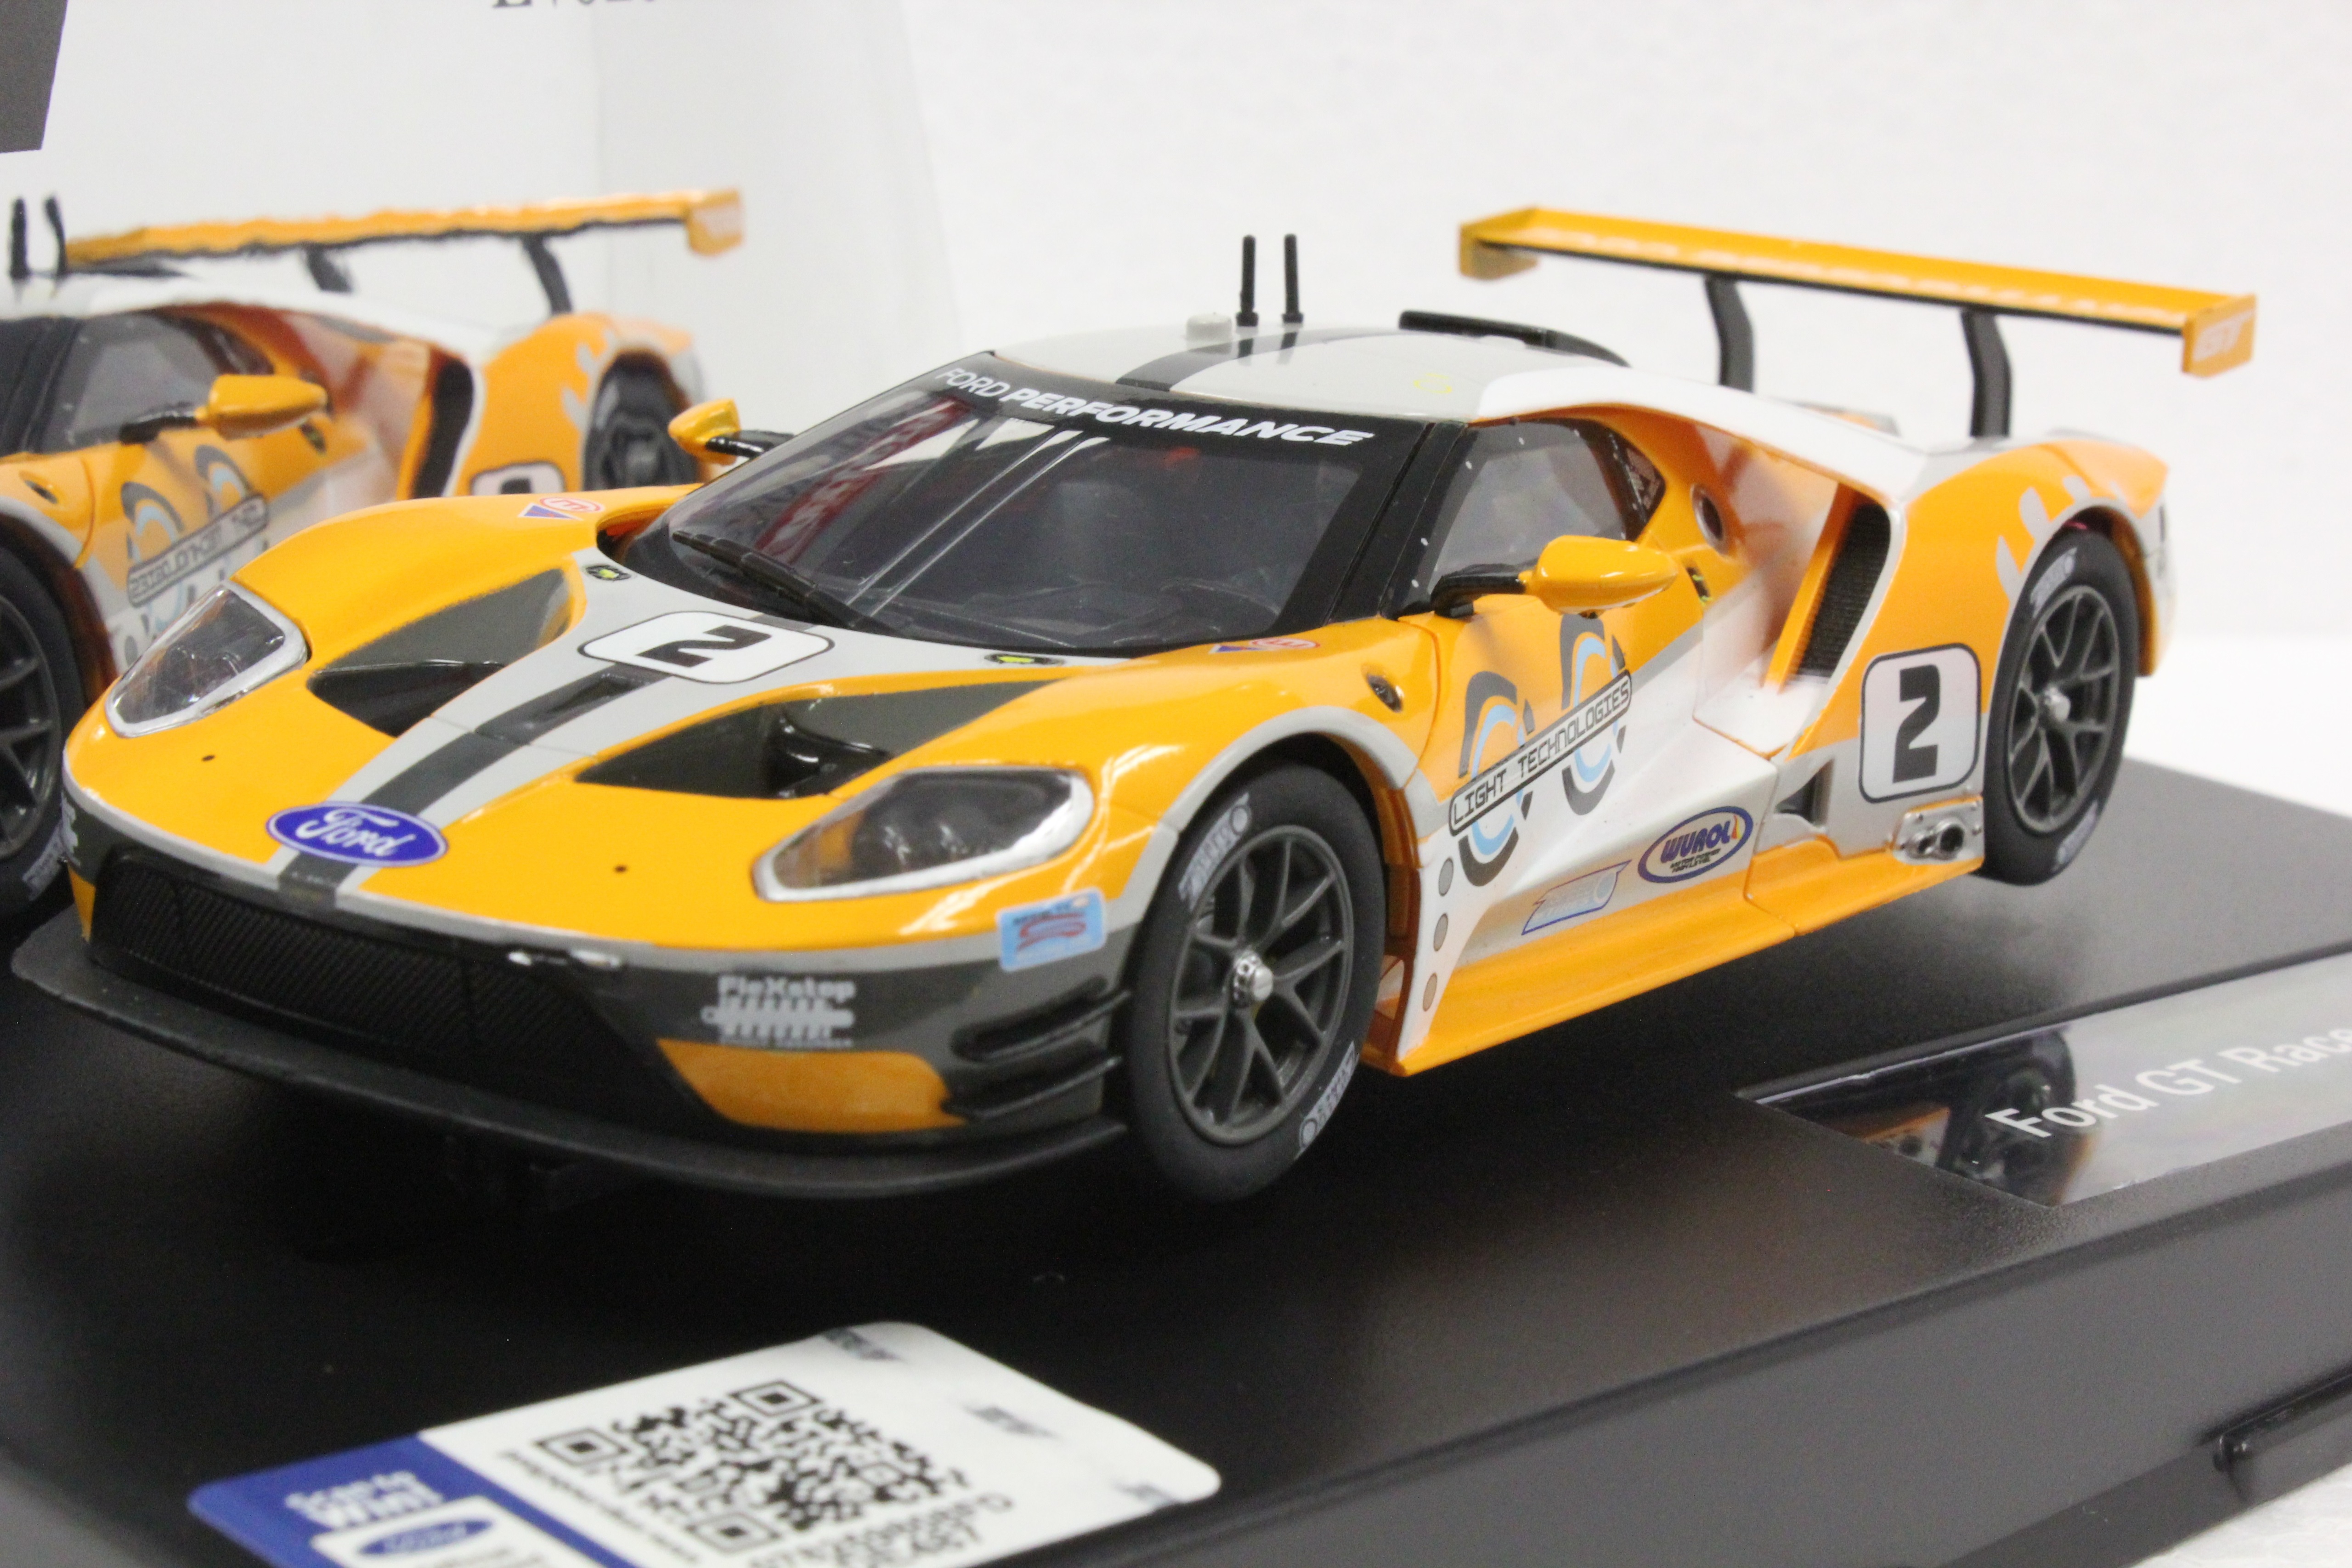 27547 Carrera Evolution Ford GT Race Car #2 1:32 Slot Car - Great Traditions